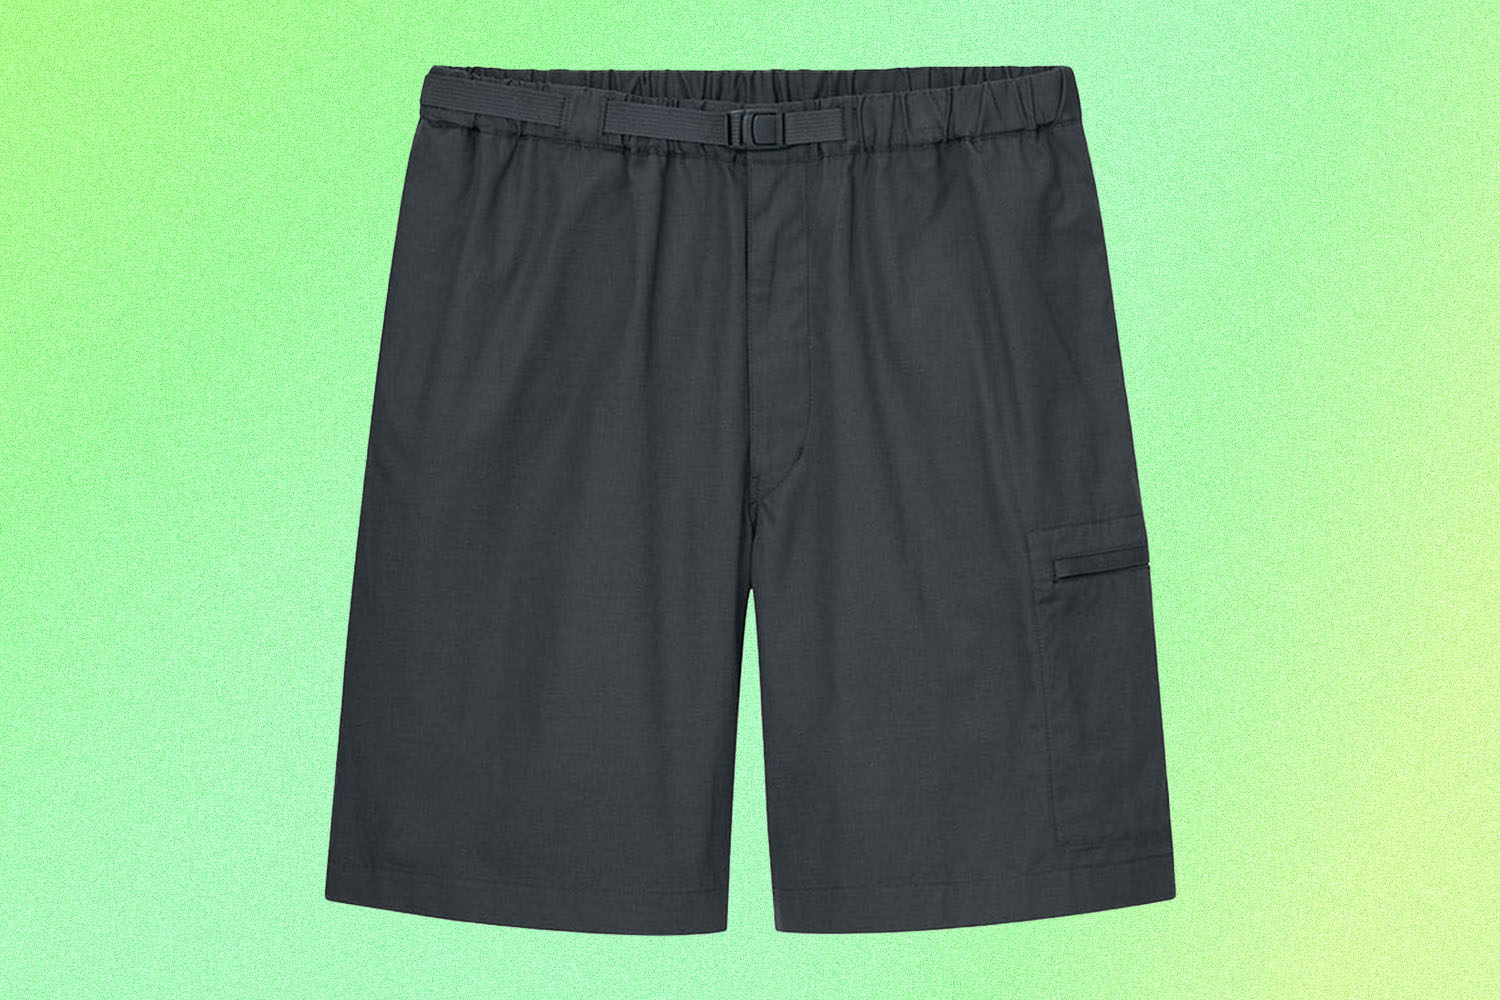 Green belted shorts on a green background